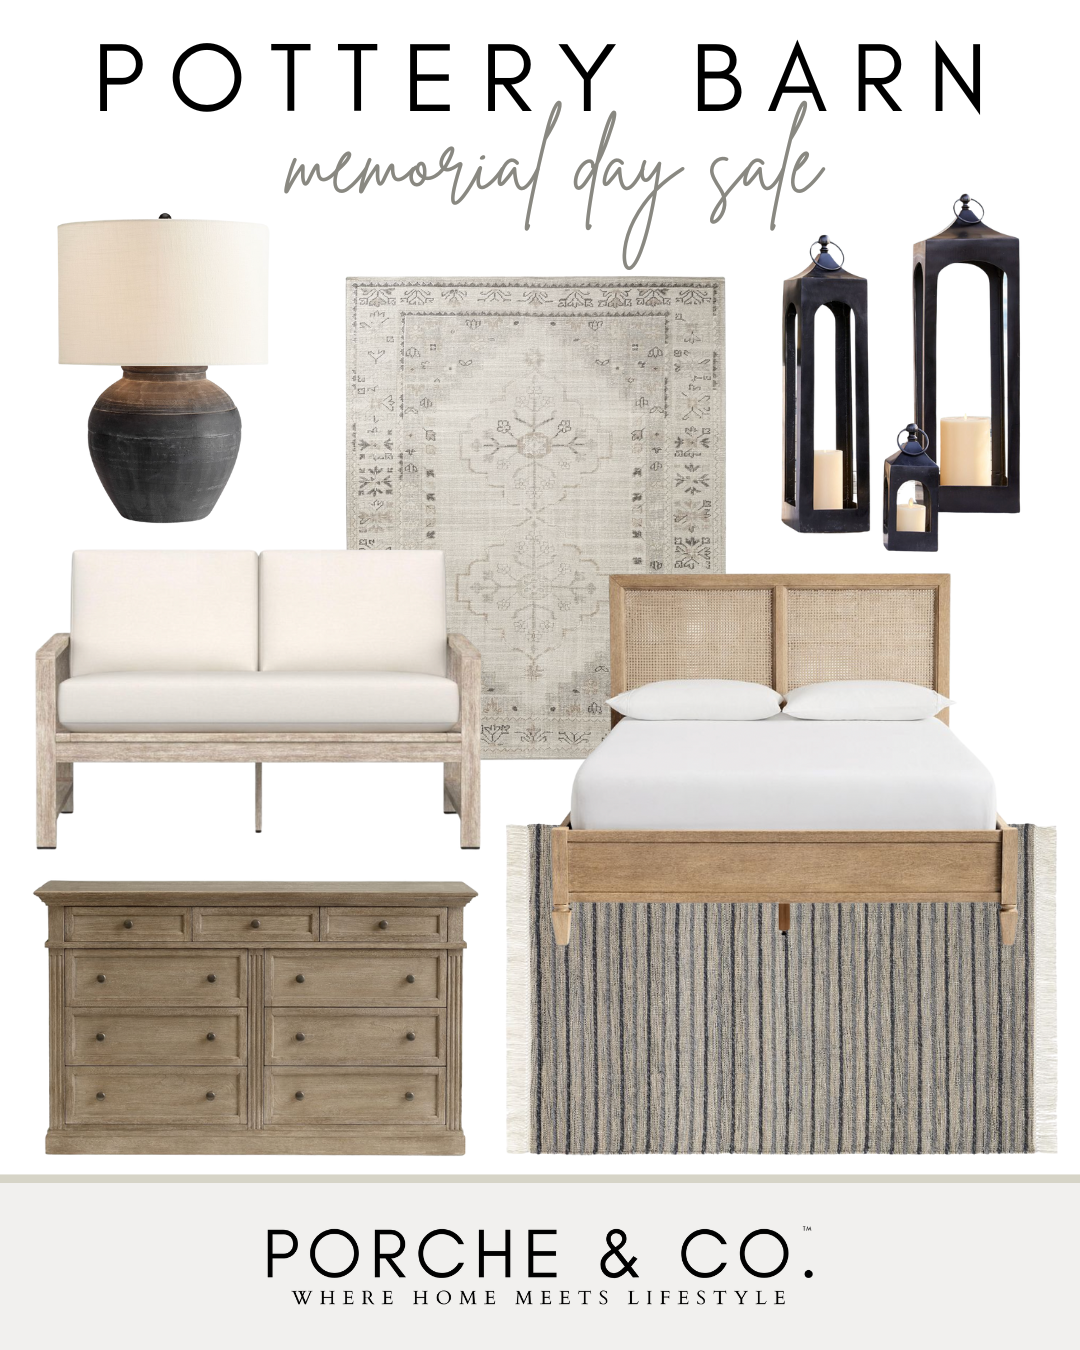 Pottery Barn Memorial Day sales